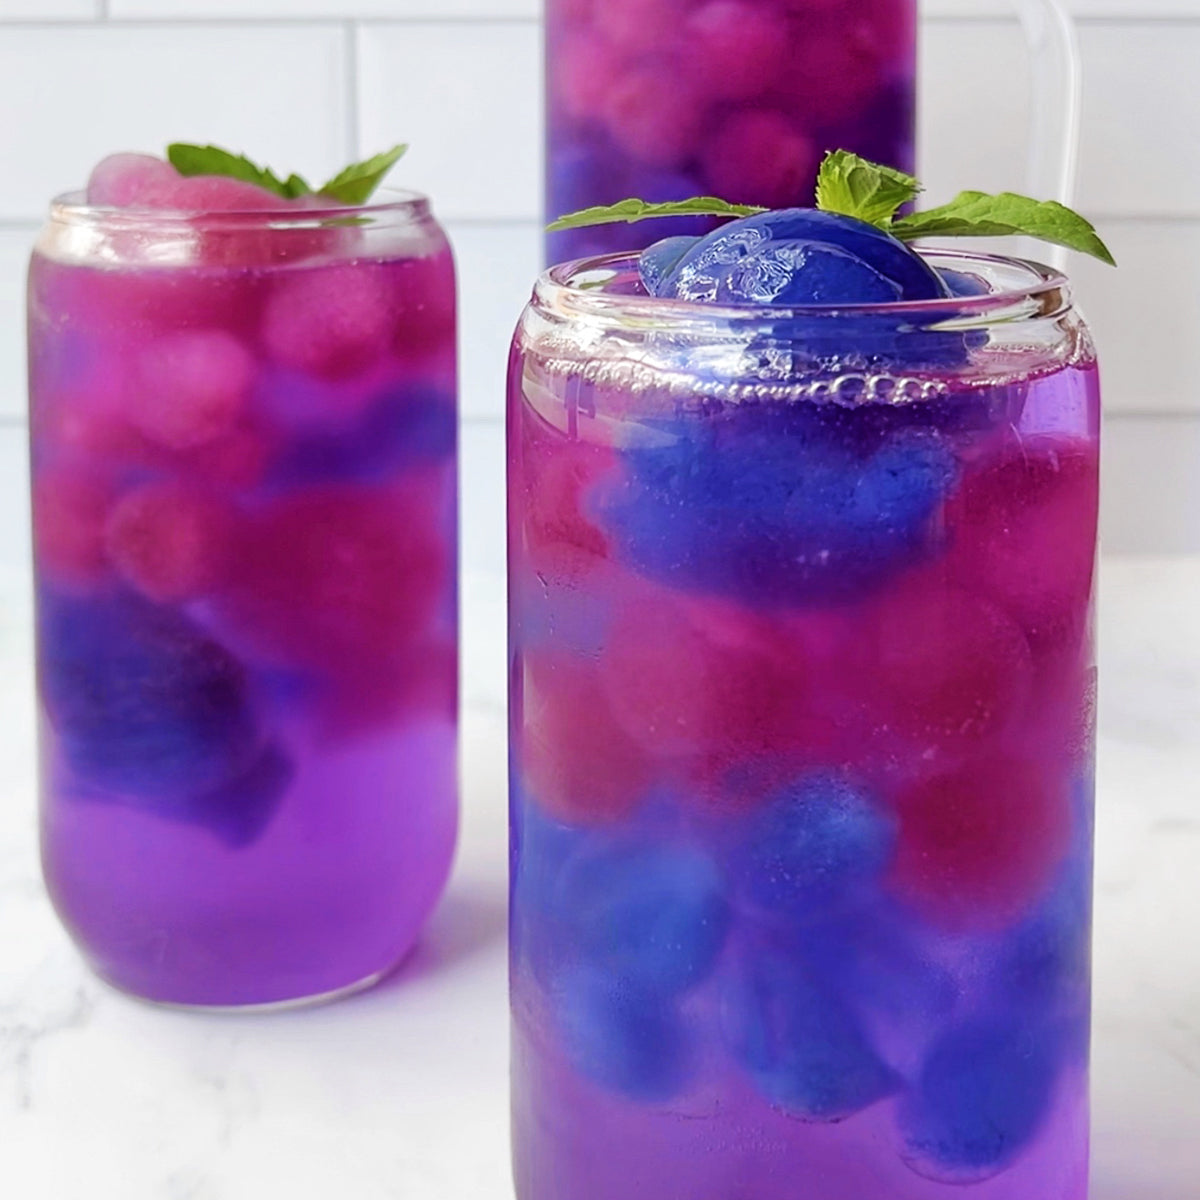 https://cdn.shopify.com/s/files/1/1921/3233/articles/SUNCORE_FOODS_BUTTERFLY_PEA_SPRITZER.jpg?v=1676593312